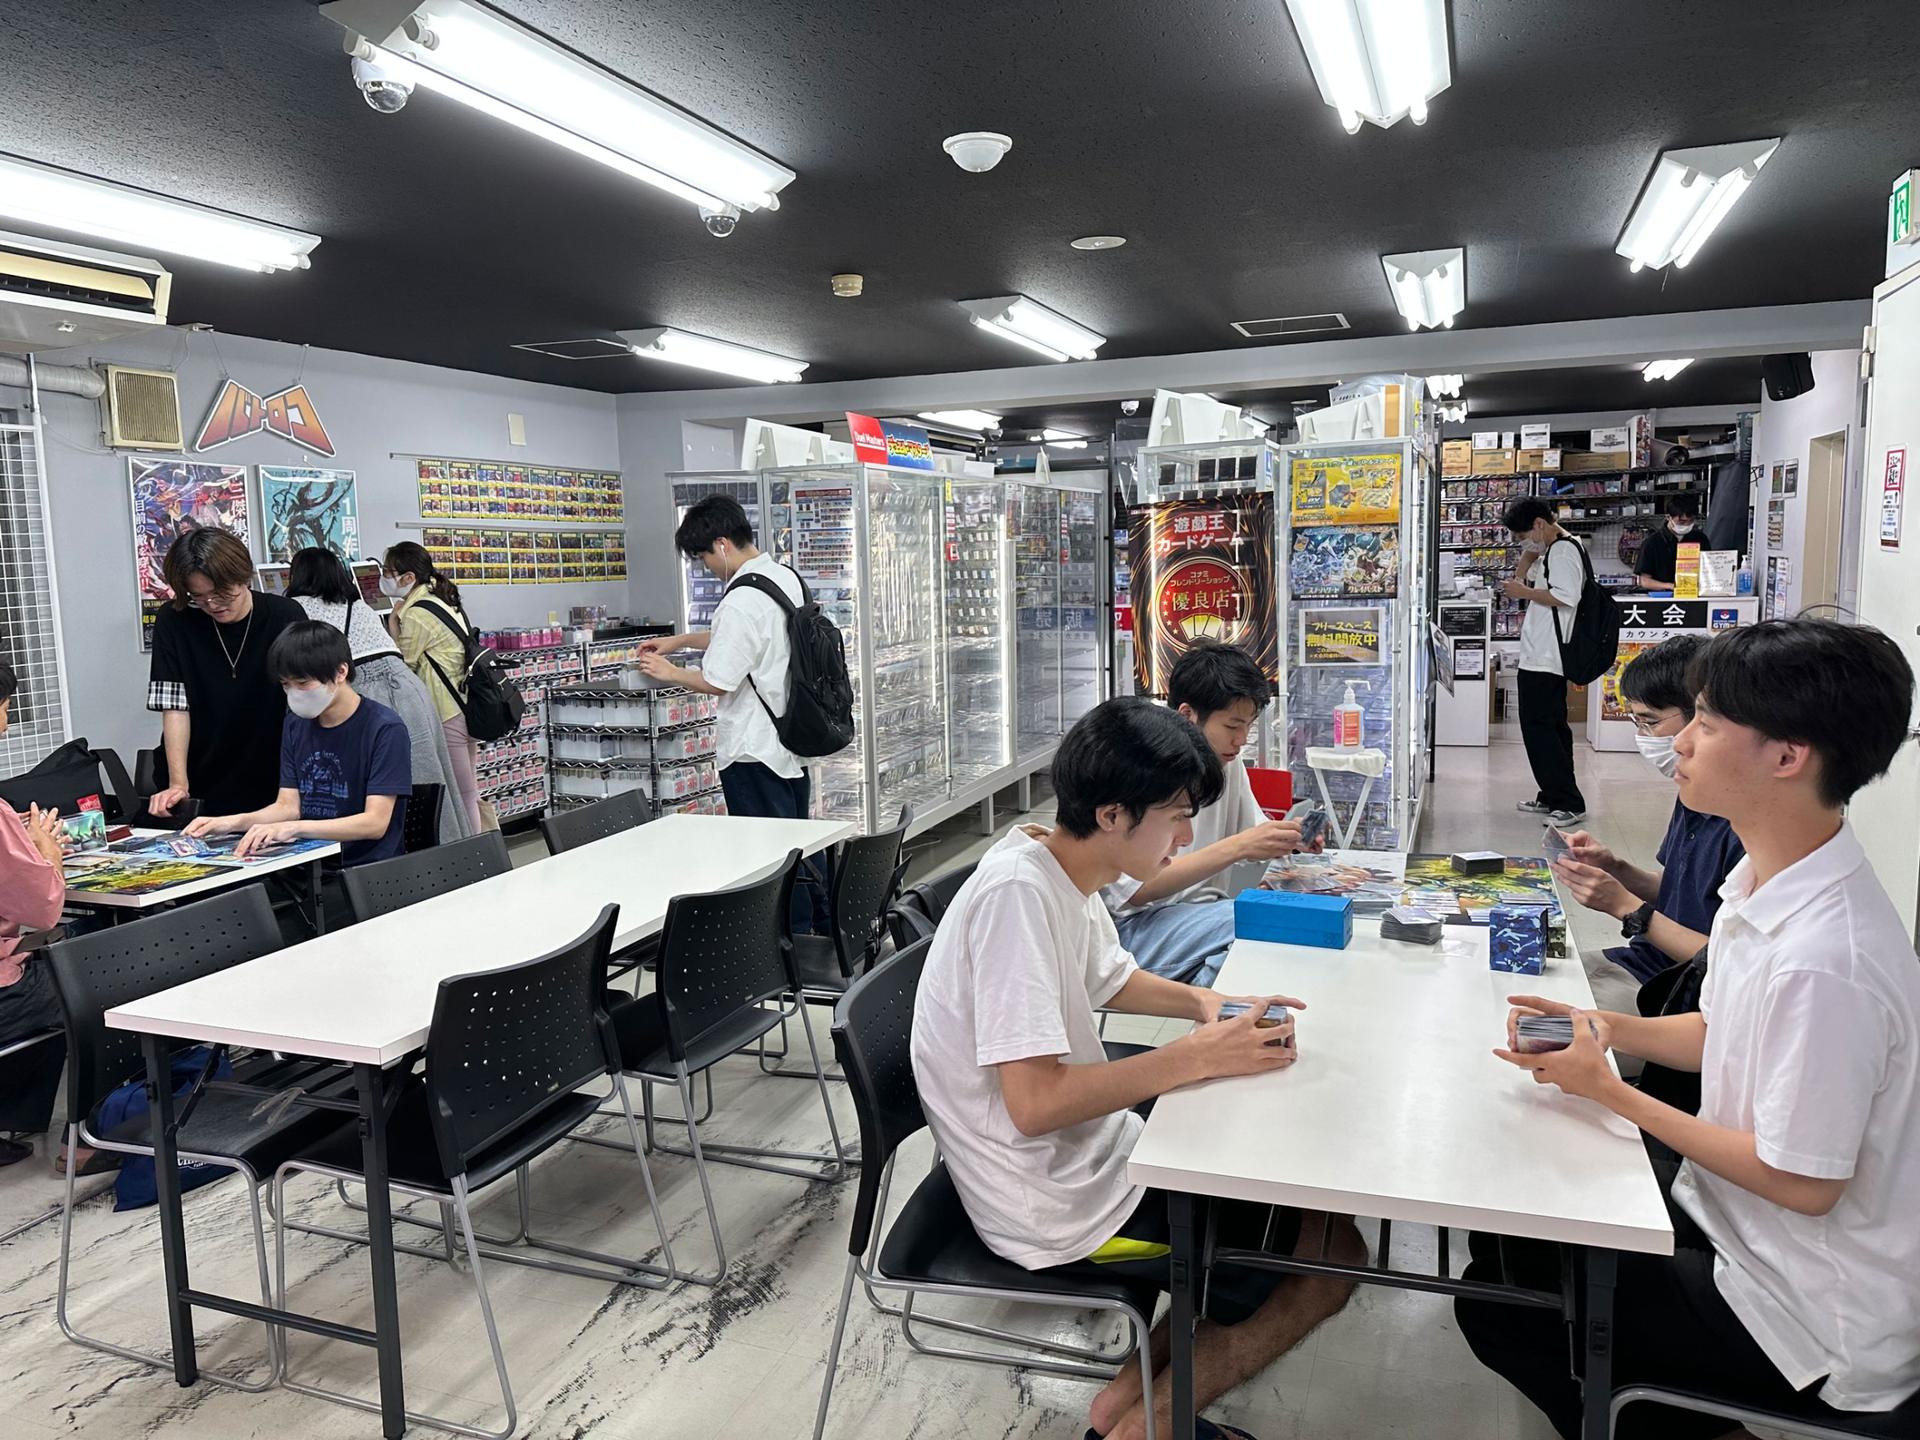 Players gather to "battle" at a card shop in Shibuya, Tokyo.